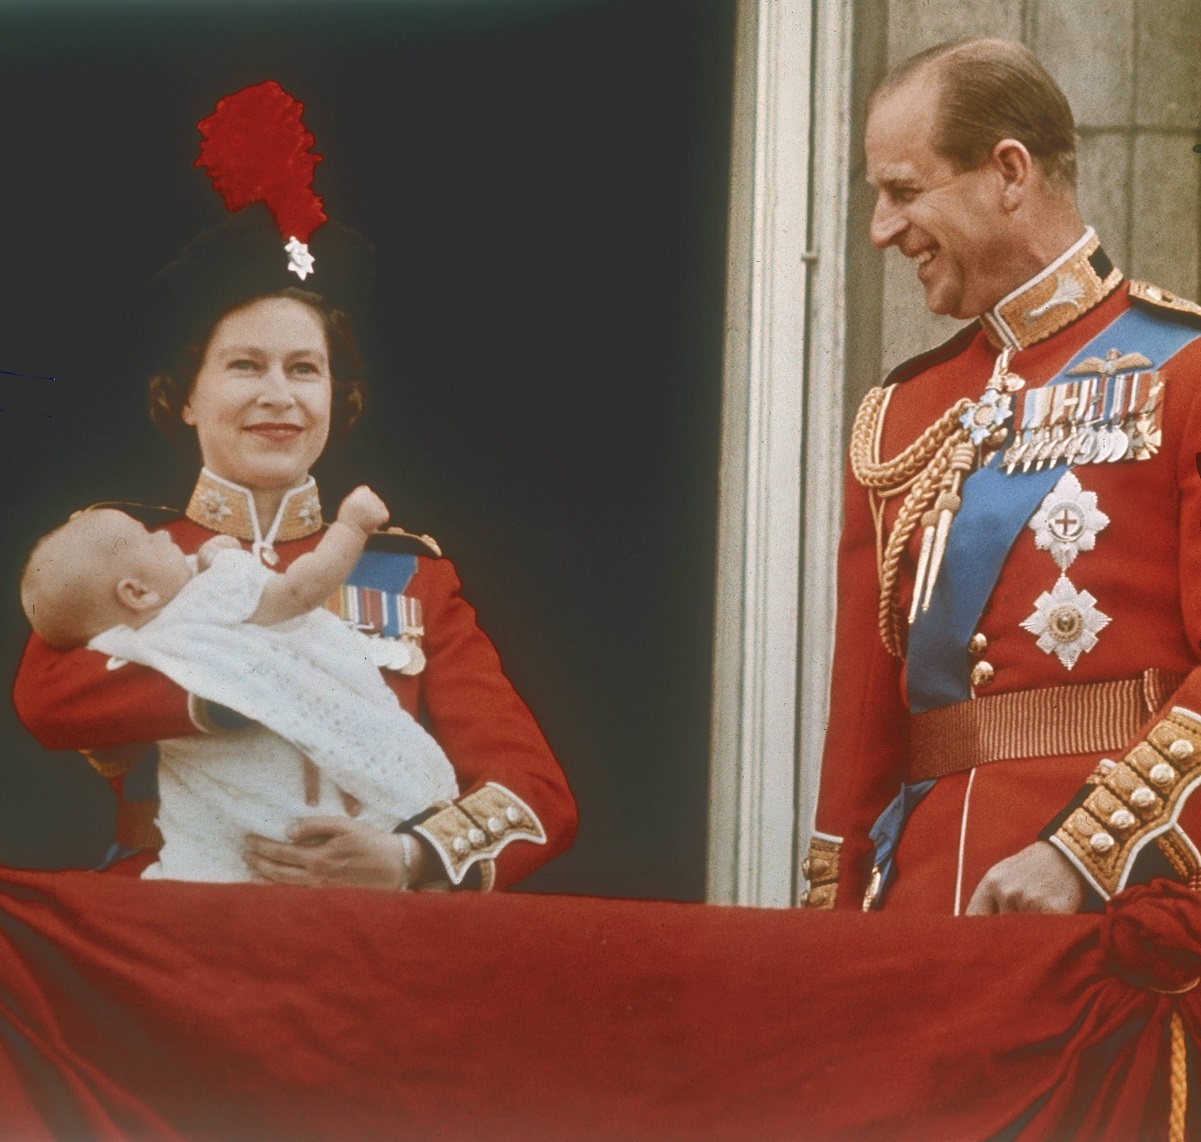  Queen Elizabeth II holding an infant Prince Edward on the royal balcony with Prince Philip